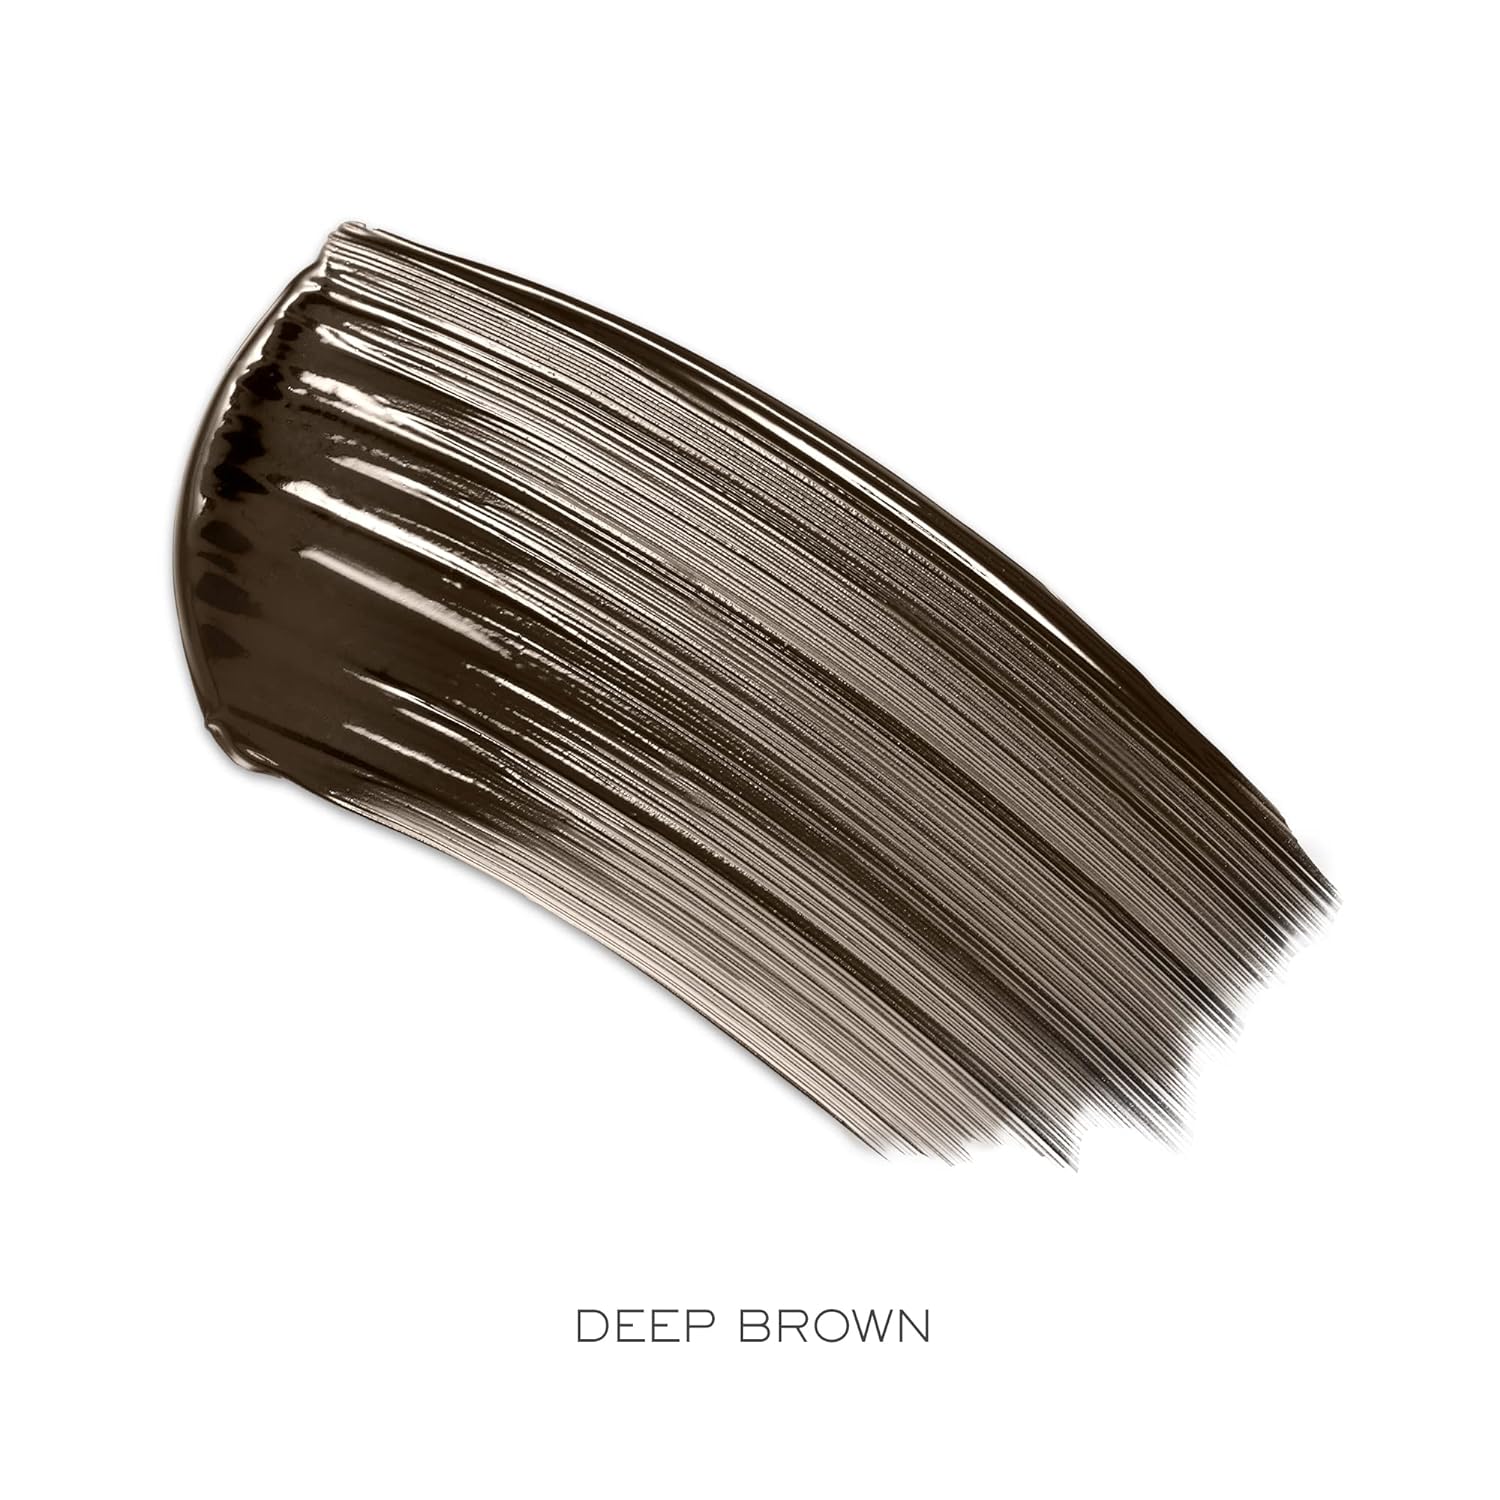 Lancôme Définicils Defining & Lengthening Mascara - For Natural-Looking Lashes - With Vitamin B5 - Deep Brown : Beauty & Personal Care